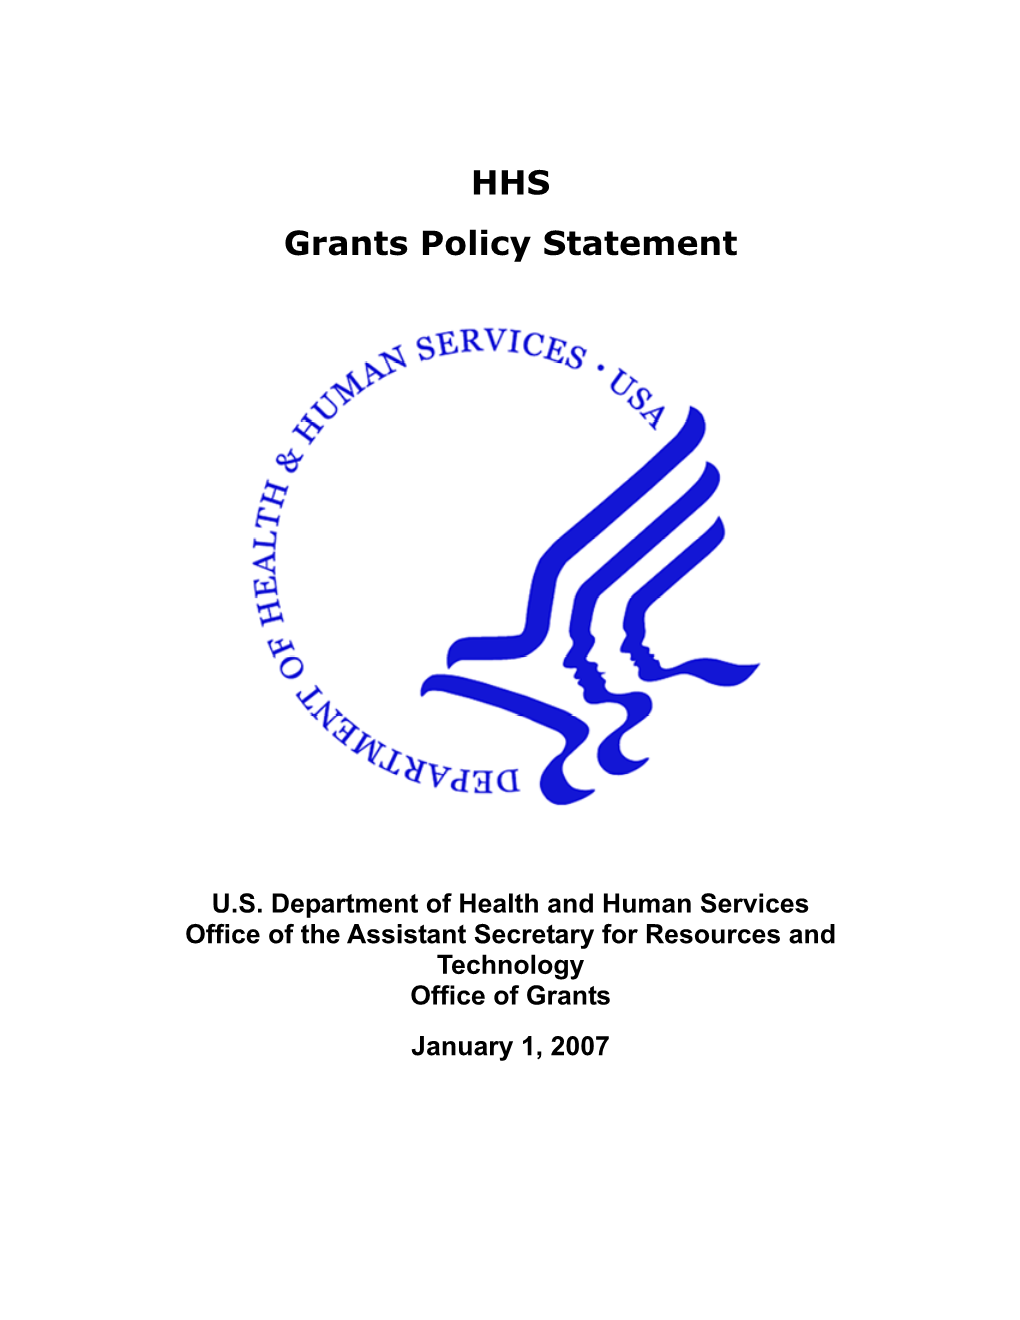 HHS Grants Policy Statement